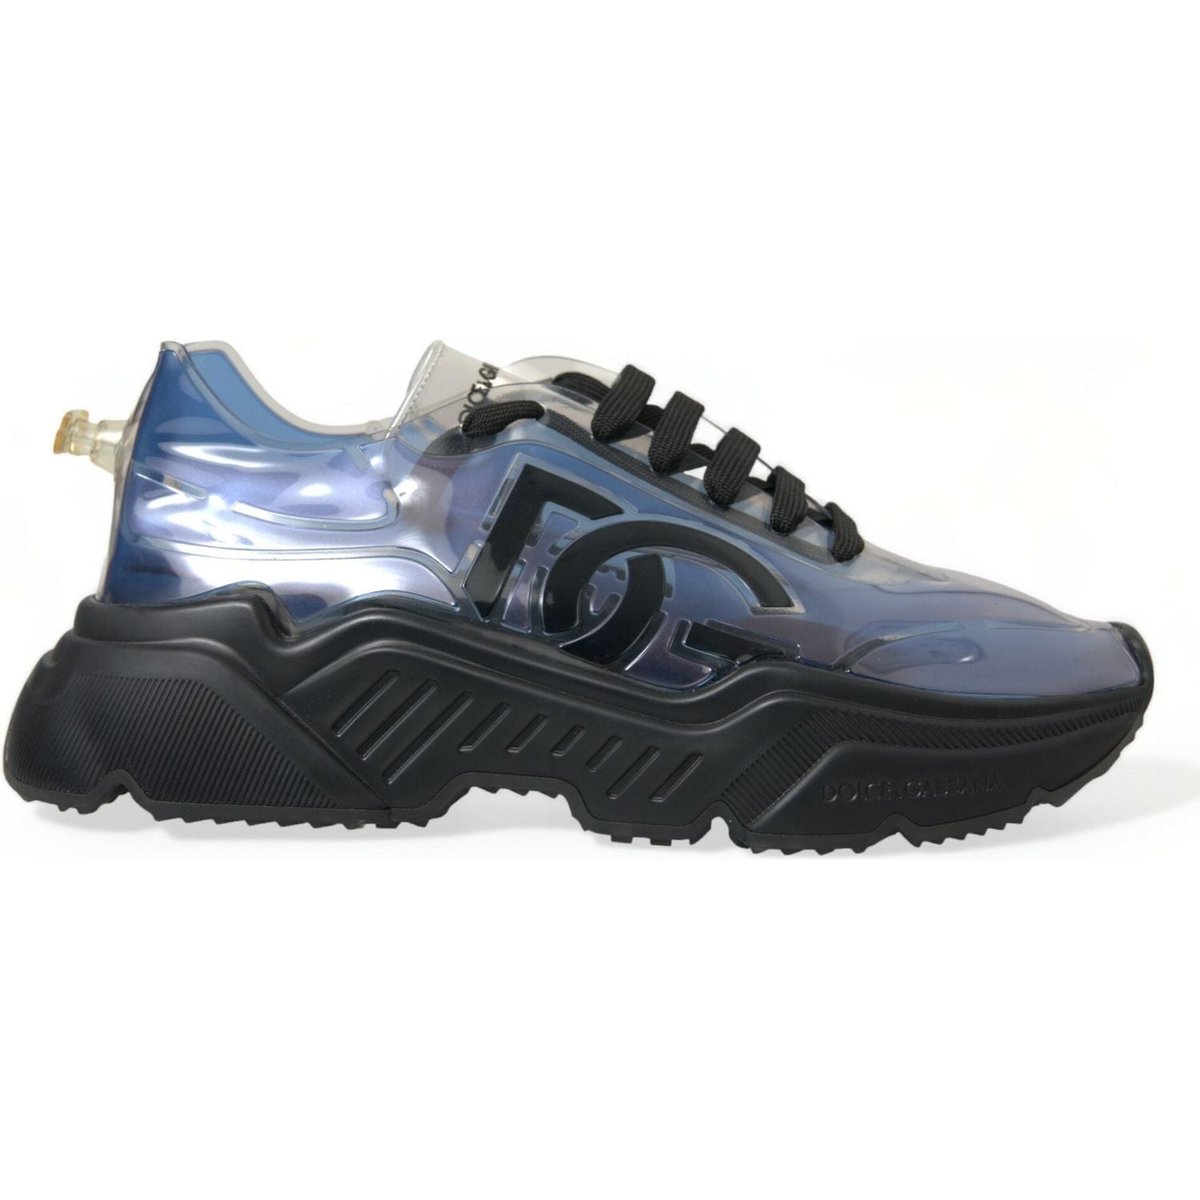 🤗💜Dolce & Gabbana
Blue Logo Inflatable Rubber Daymaster Sneakers Shoes 
DOLCE & GABBANA
Gorgeous brand new with tags, 100% Authentic Dolce & Gabbana Daymaster low top sneakers feature the crossover DG logo stitched on the side and a super-flex rubber sole.
Model: Daymaster...